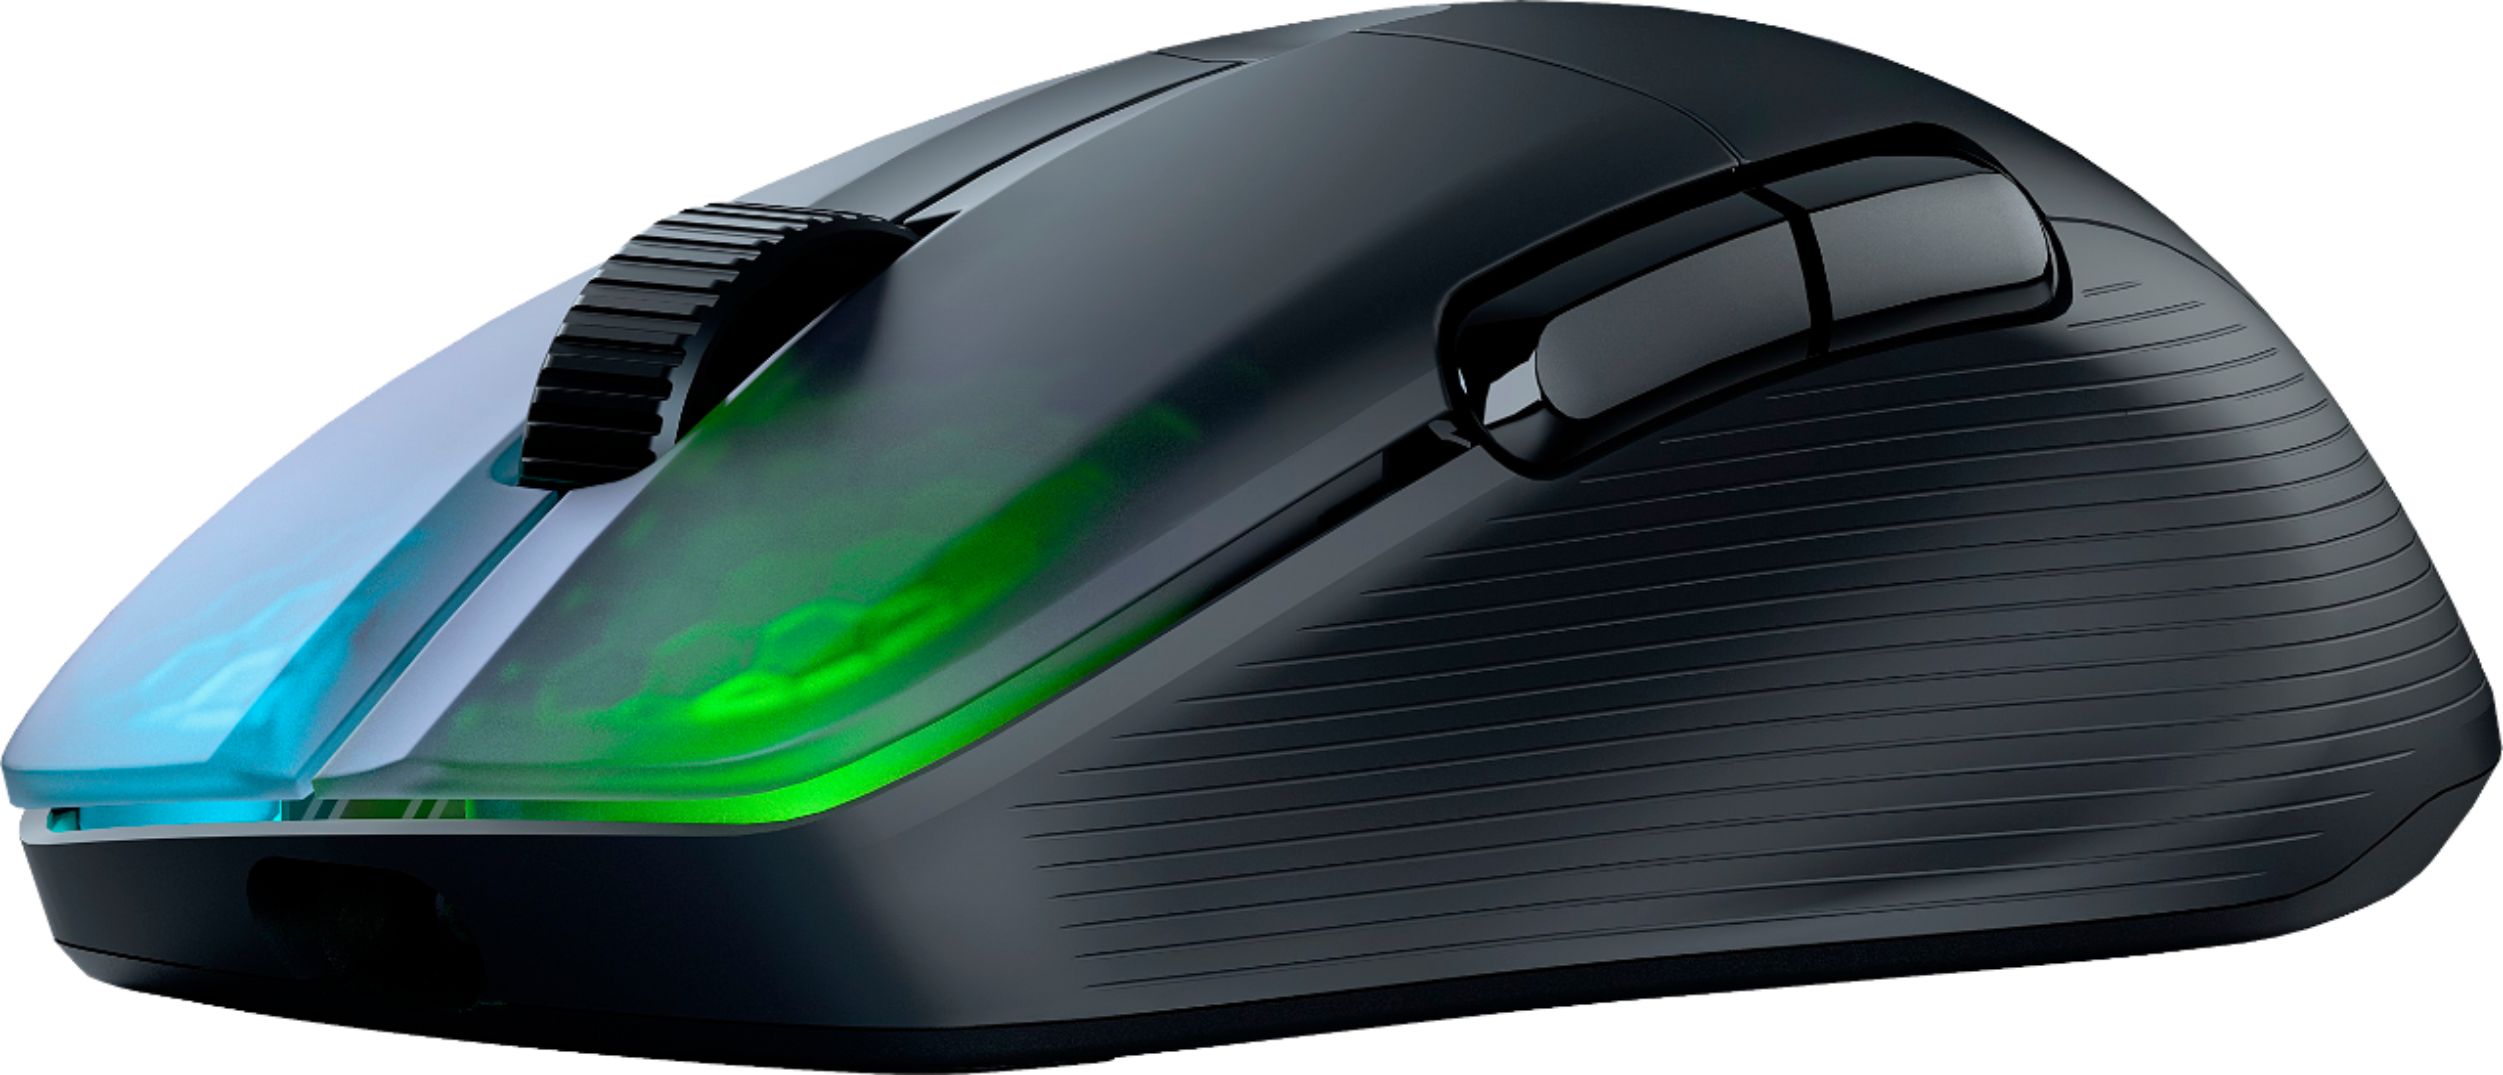 Angle View: ROCCAT - Kone Pro Air  Lightweight Wireless Bluetooth Optical Gaming Mouse With 19K DPI and RGB Lighting - Ash Black